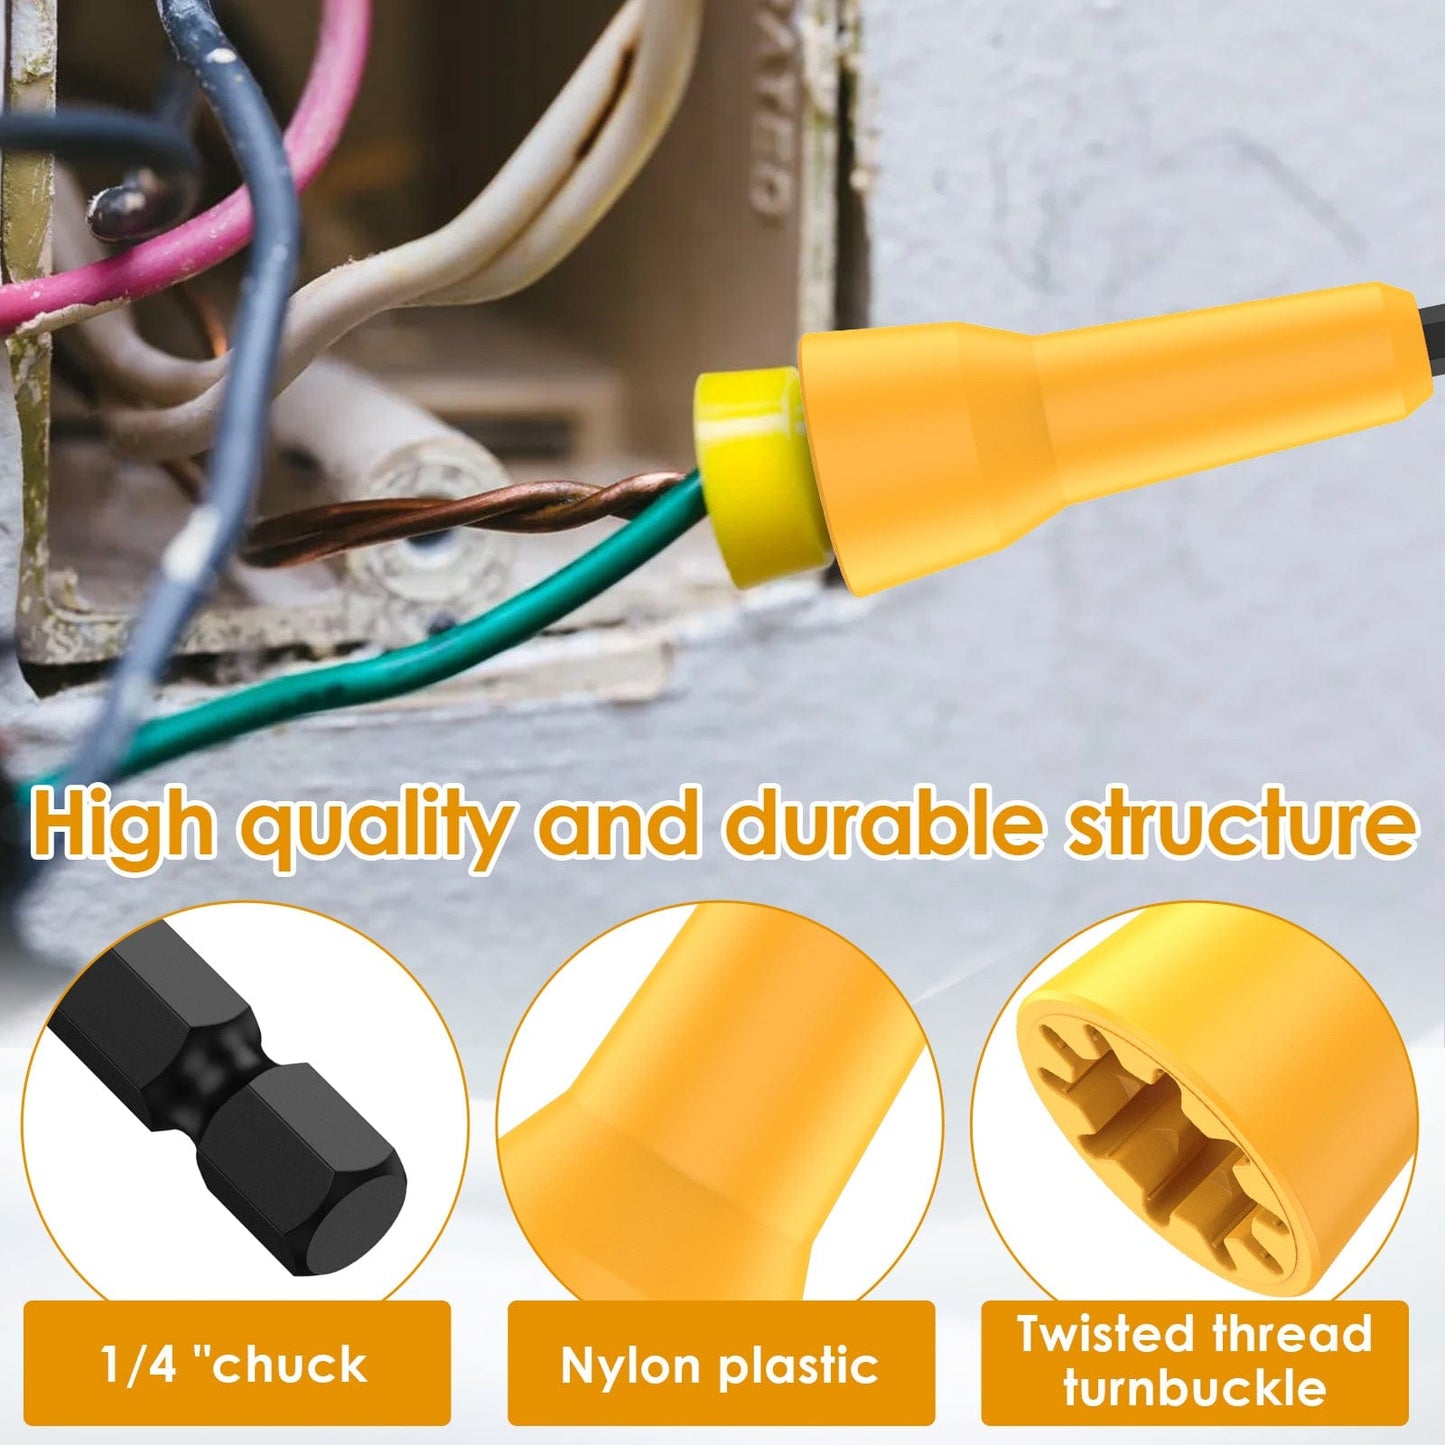 2pcs Socket Wiring Cap Wire Nut Twisted Wire Multifunctional Twisting Tool With 1/4 Inch Chuck Nut Driver Durable Rotary Twisted Wire Connector Socket